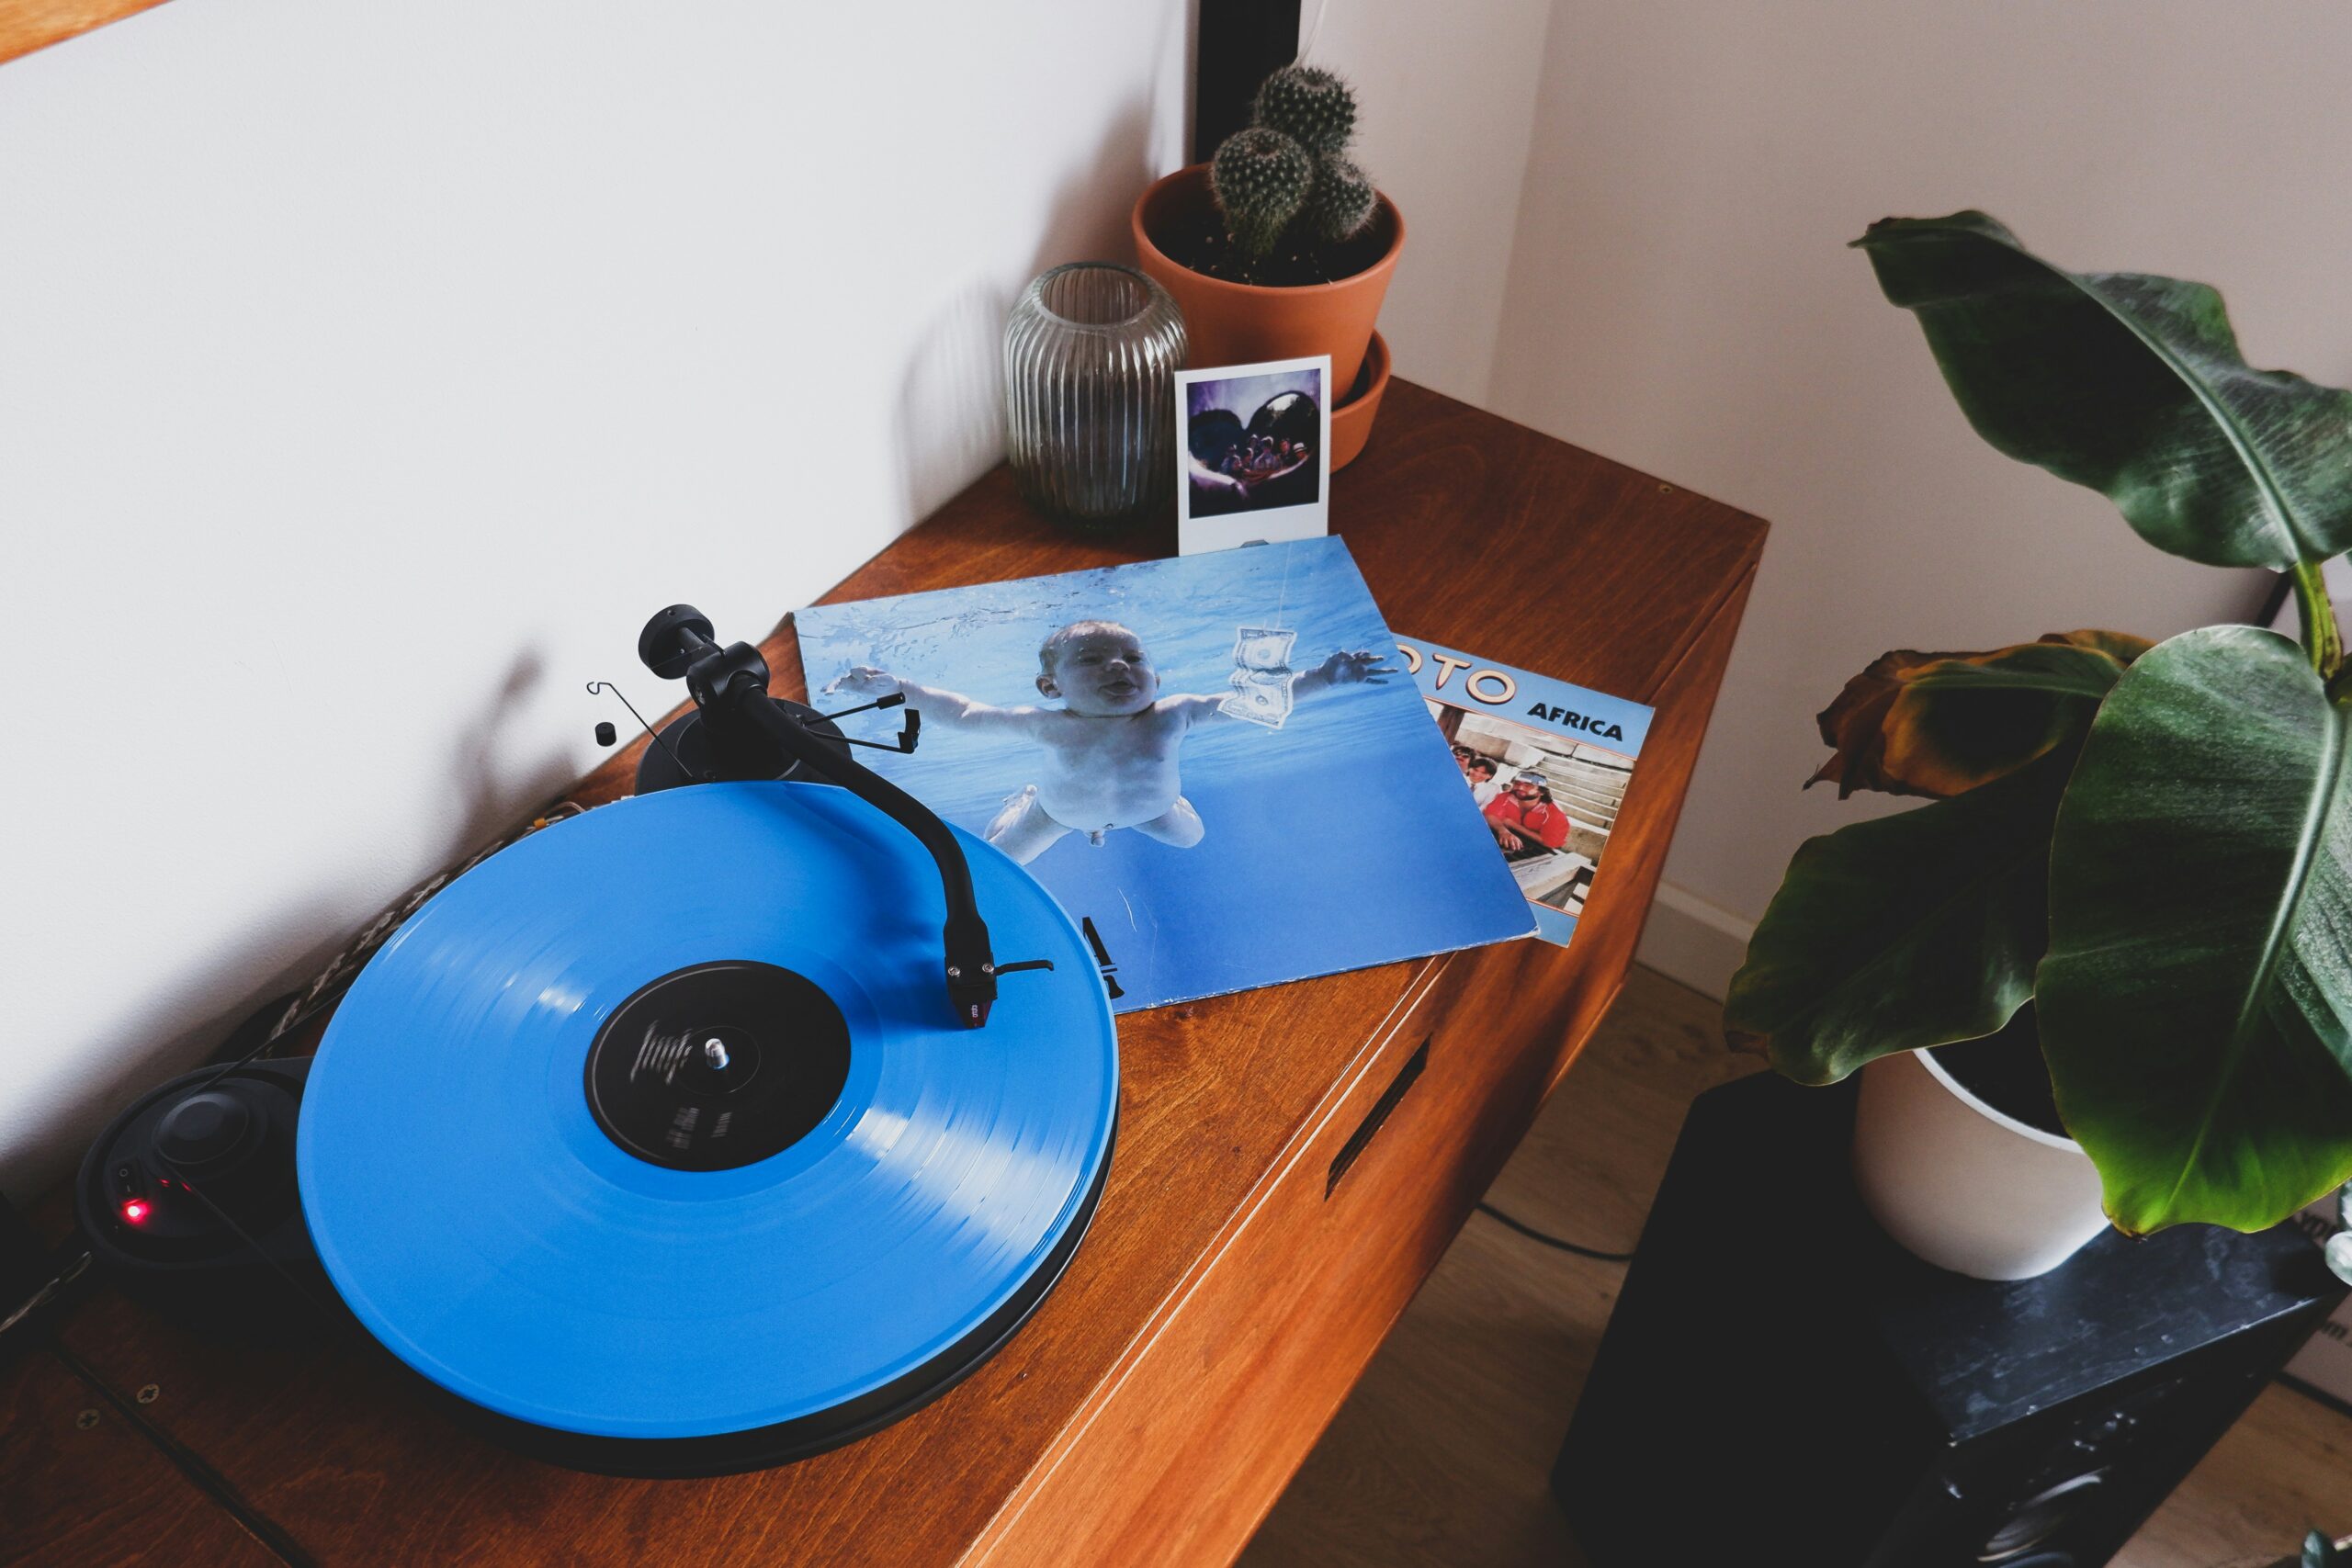 Nirvana in Buddhism, blue vinyl record on brown wooden table